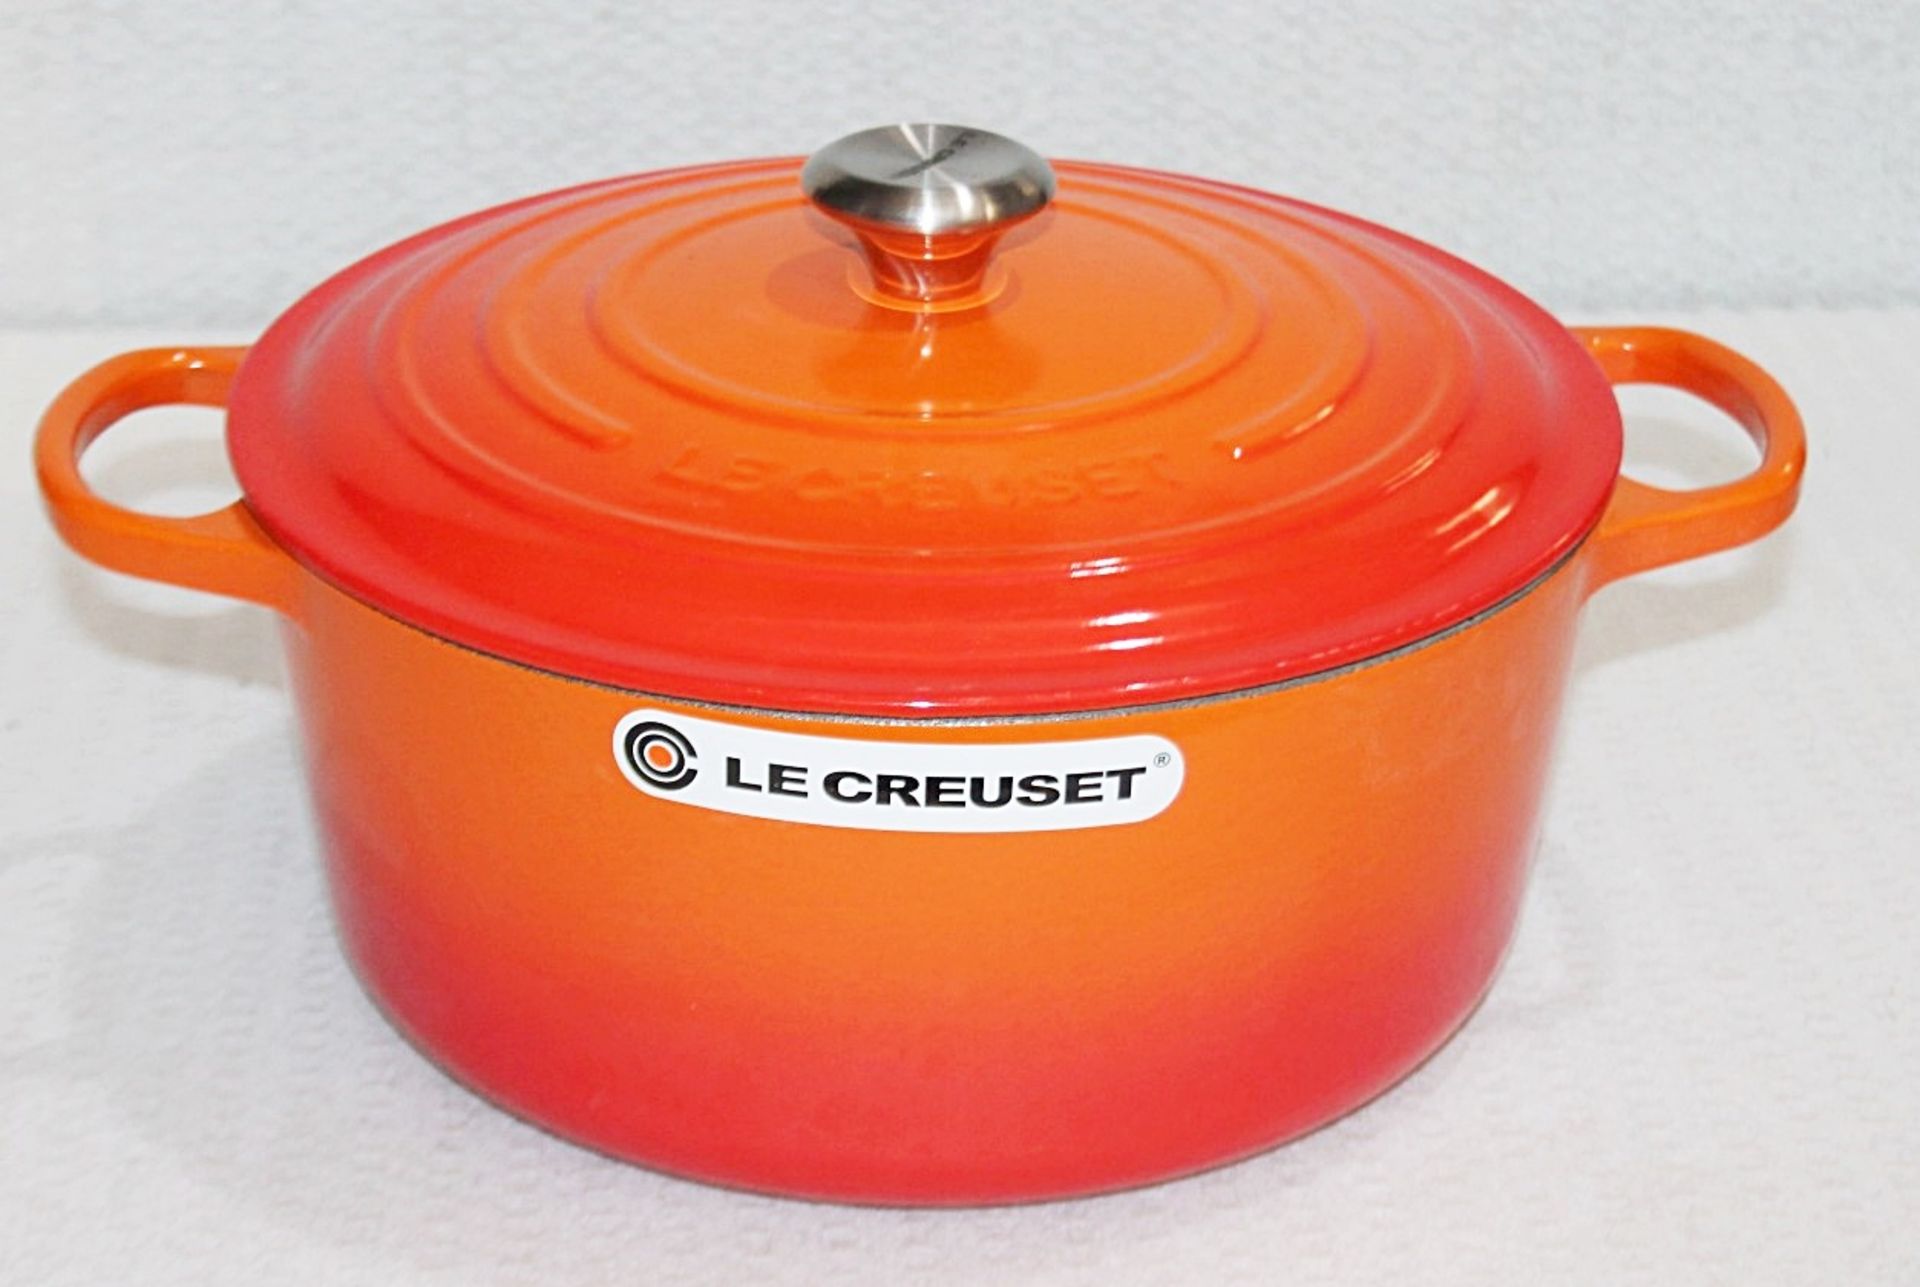 1 x LE CREUSET 'Volcanic' Enamelled Cast Iron Round Casserole Dish With Lid (30cm) - RRP £355.00 - Image 2 of 13